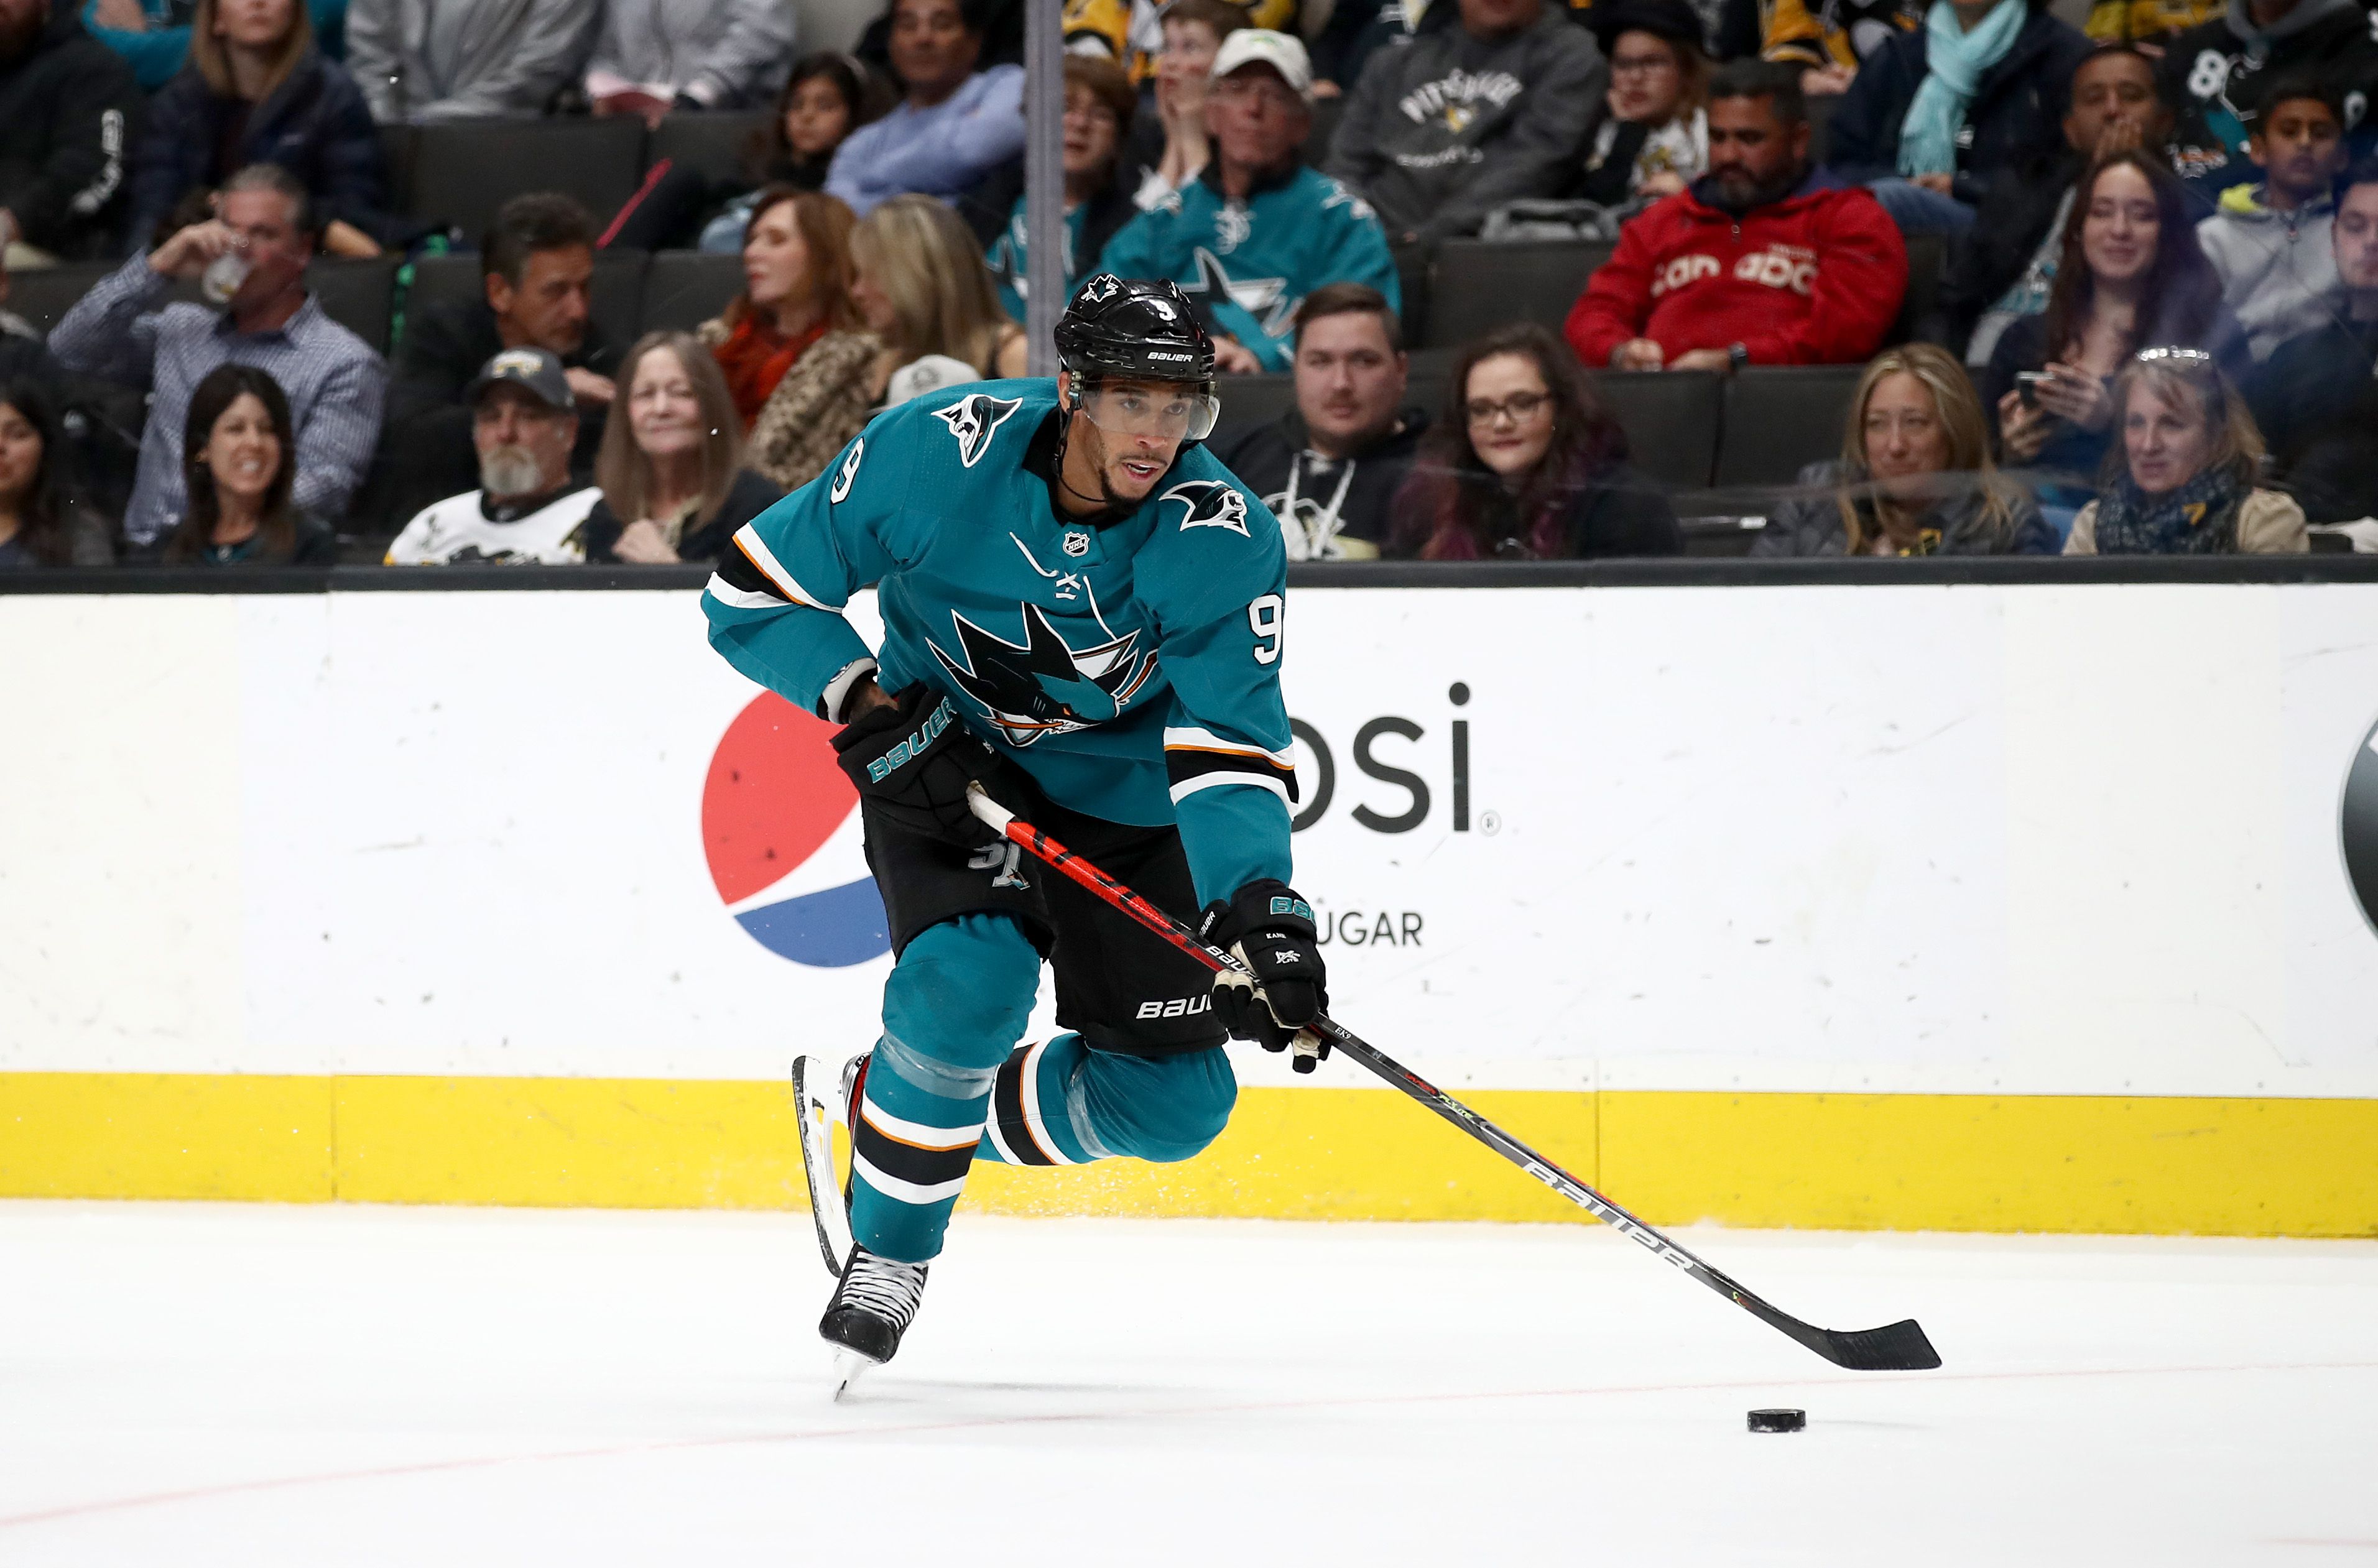 Black NHL Prospect K'Andre Miller Repeatedly Called N-Word in Zoom Event